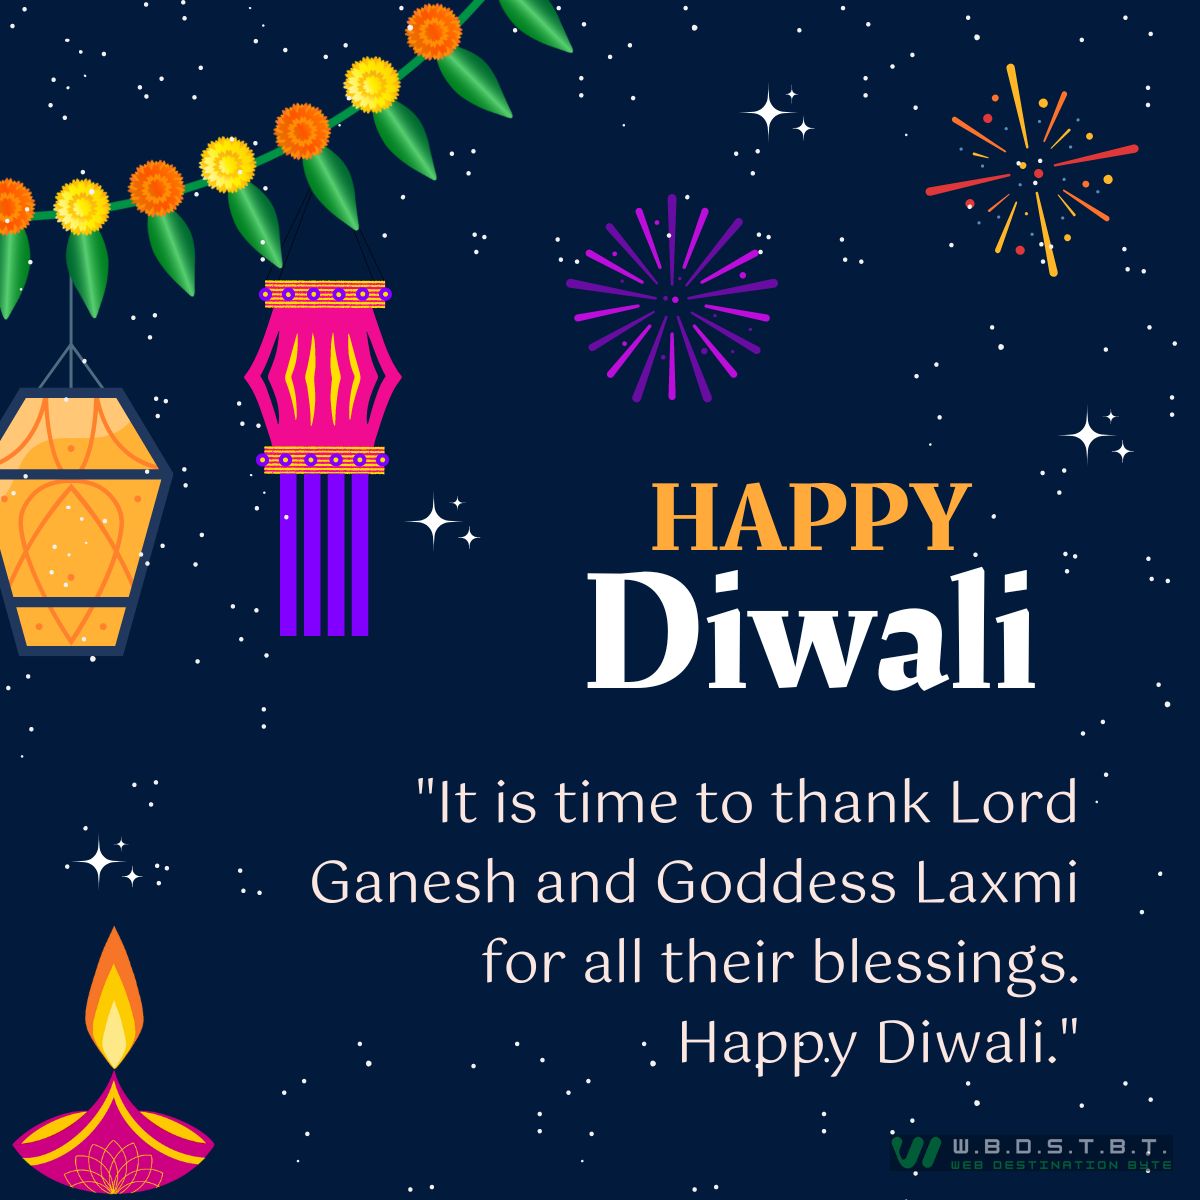 "It is time to thank Lord Ganesh and Goddess Laxmi for all their blessings. Happy Diwali."